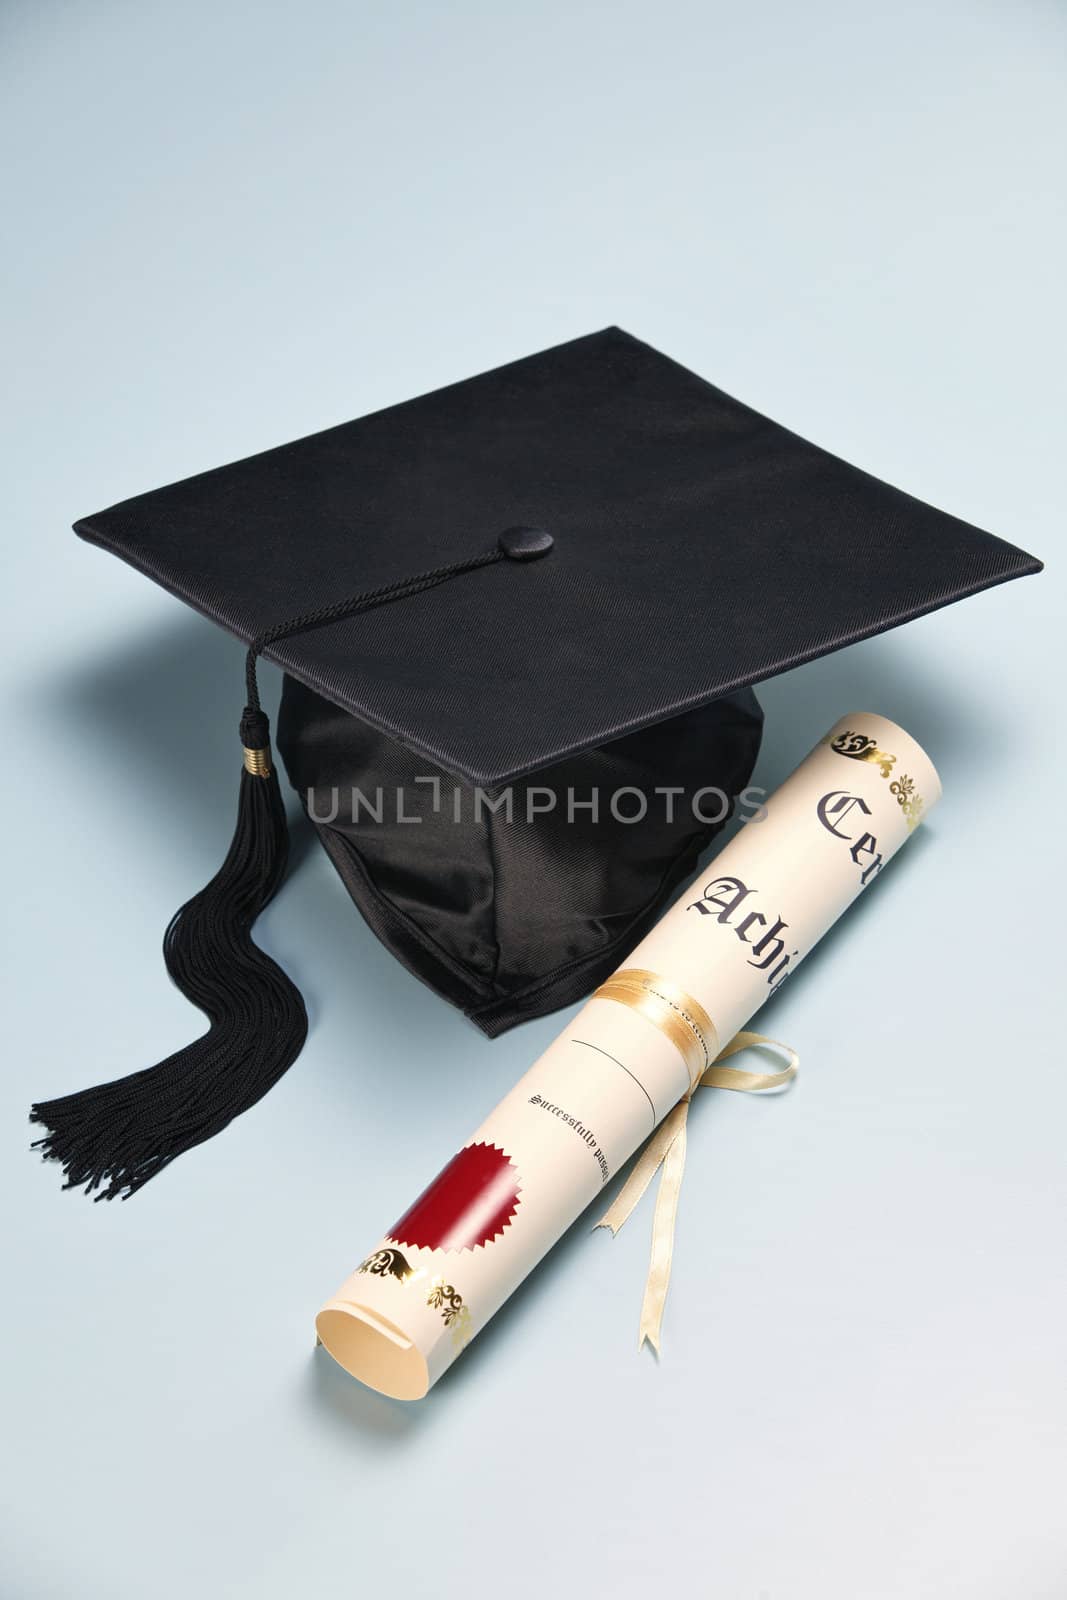 mortar board and the certificate on the plain background